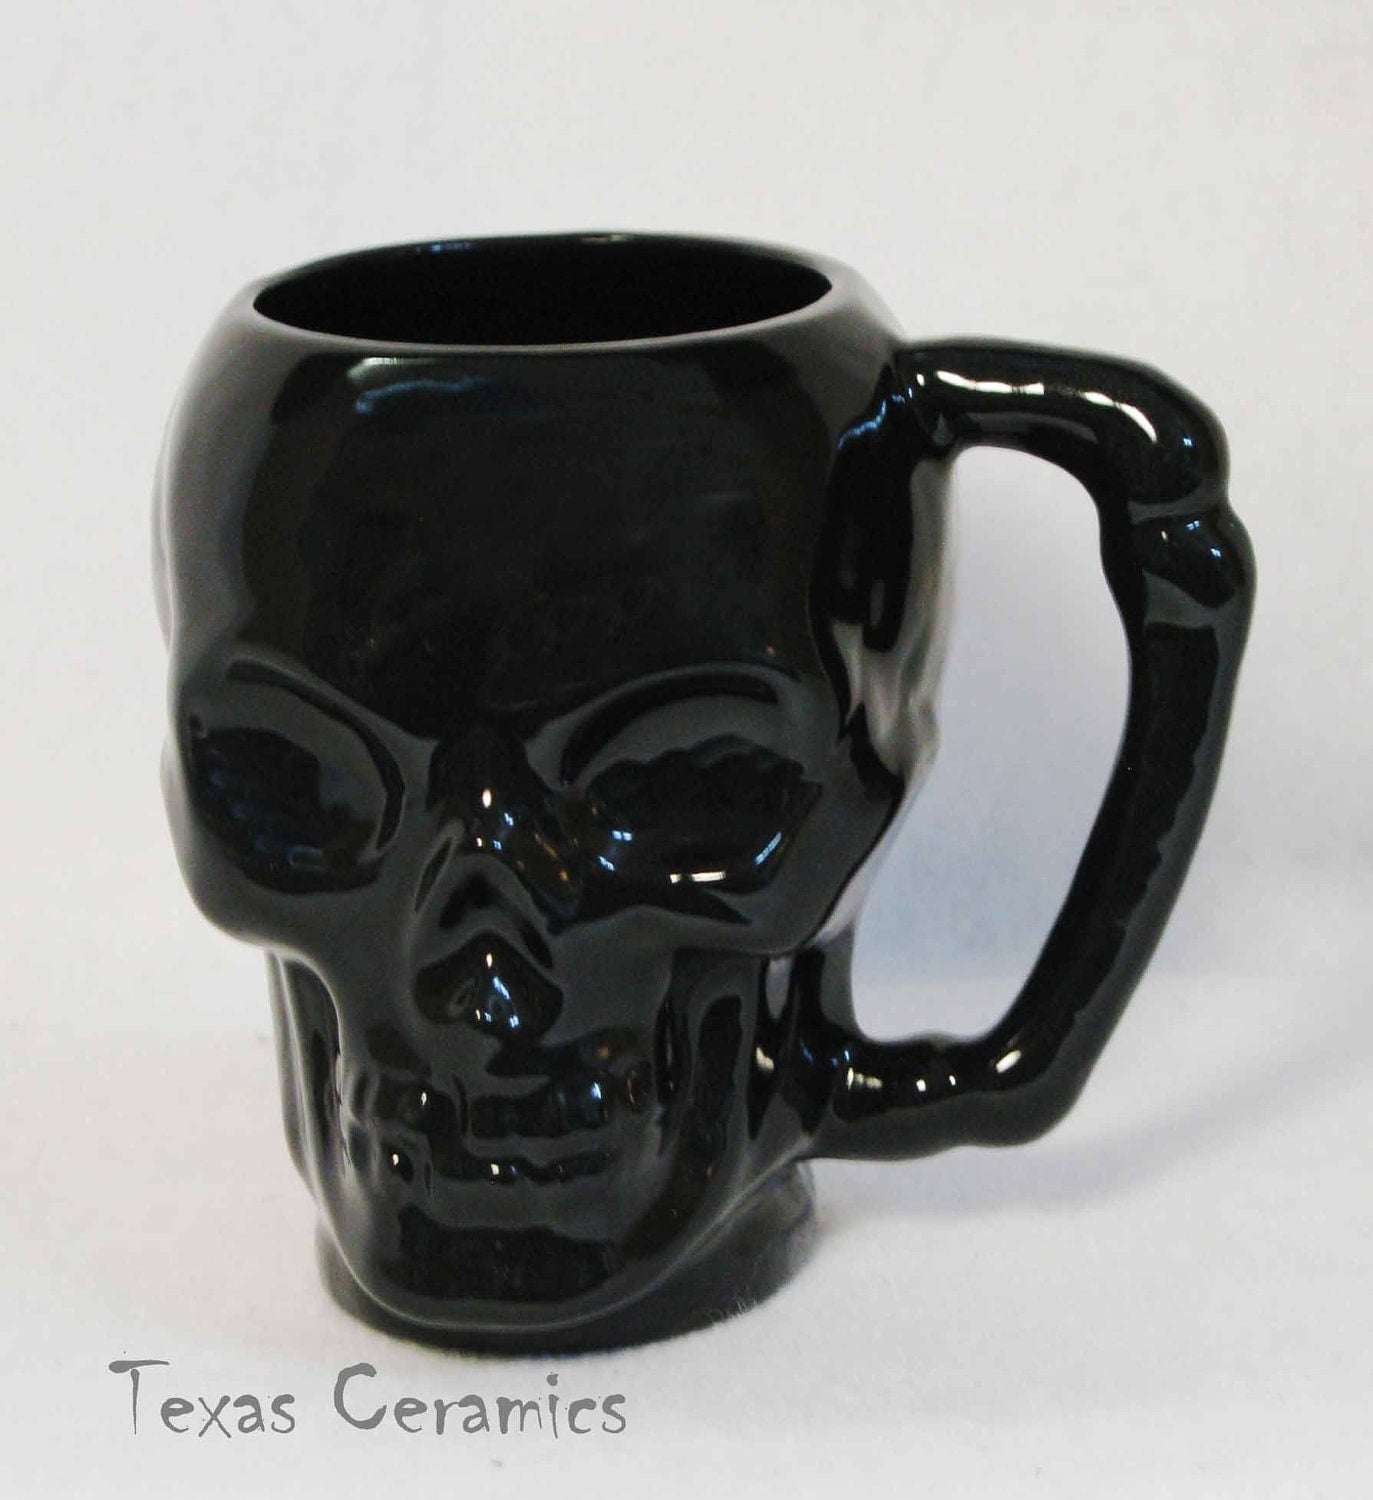 Ceramic Black Skull Mug or Cup with Bone Style by